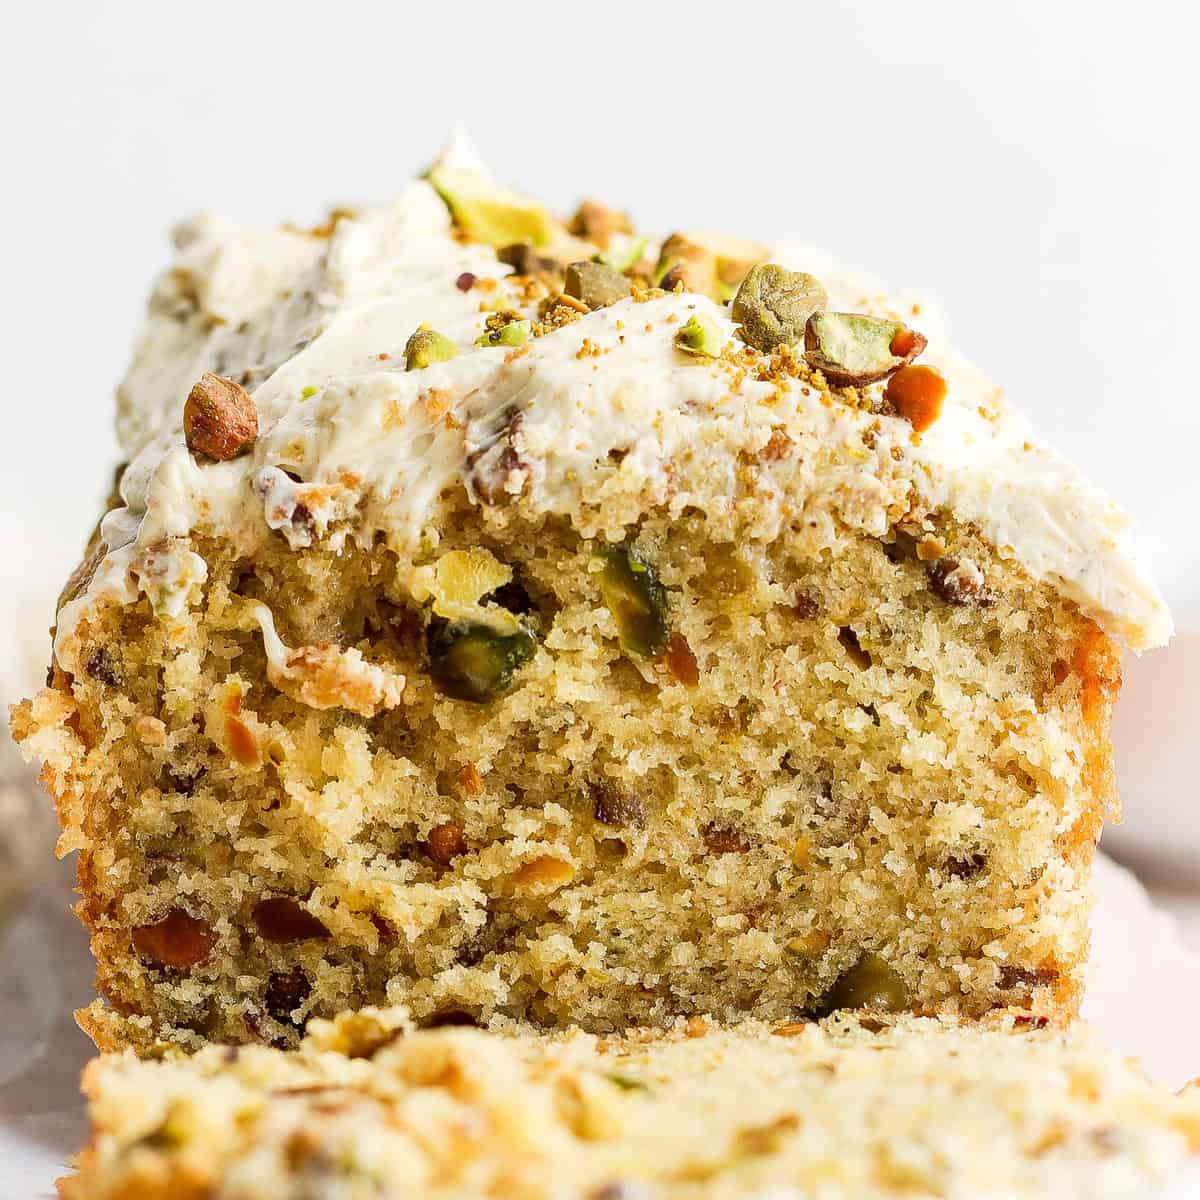 Vanilla Pistachio Loaf with Pistachio Frosting